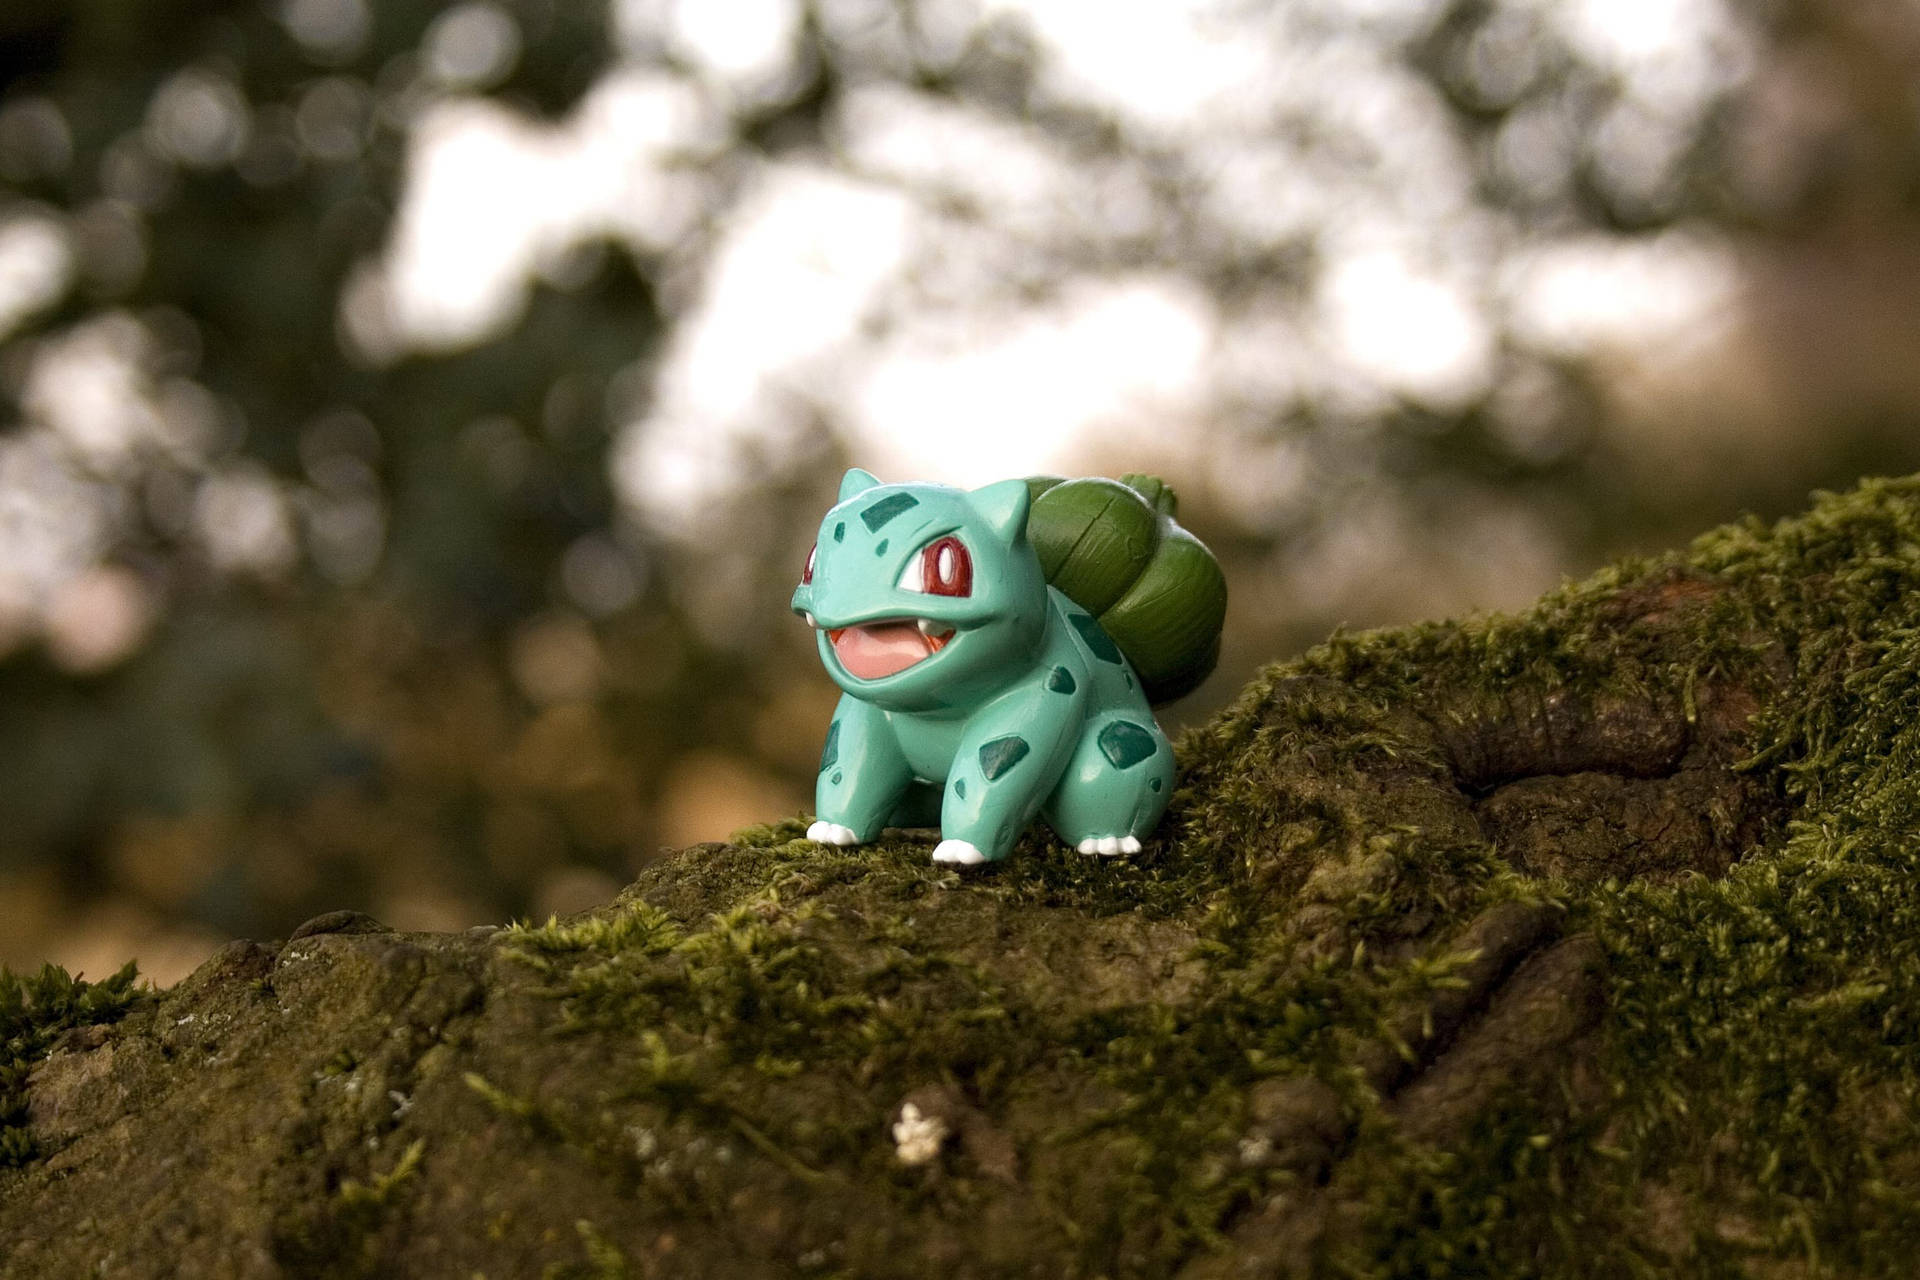 Bulbasaur 3058X2038 Wallpaper and Background Image